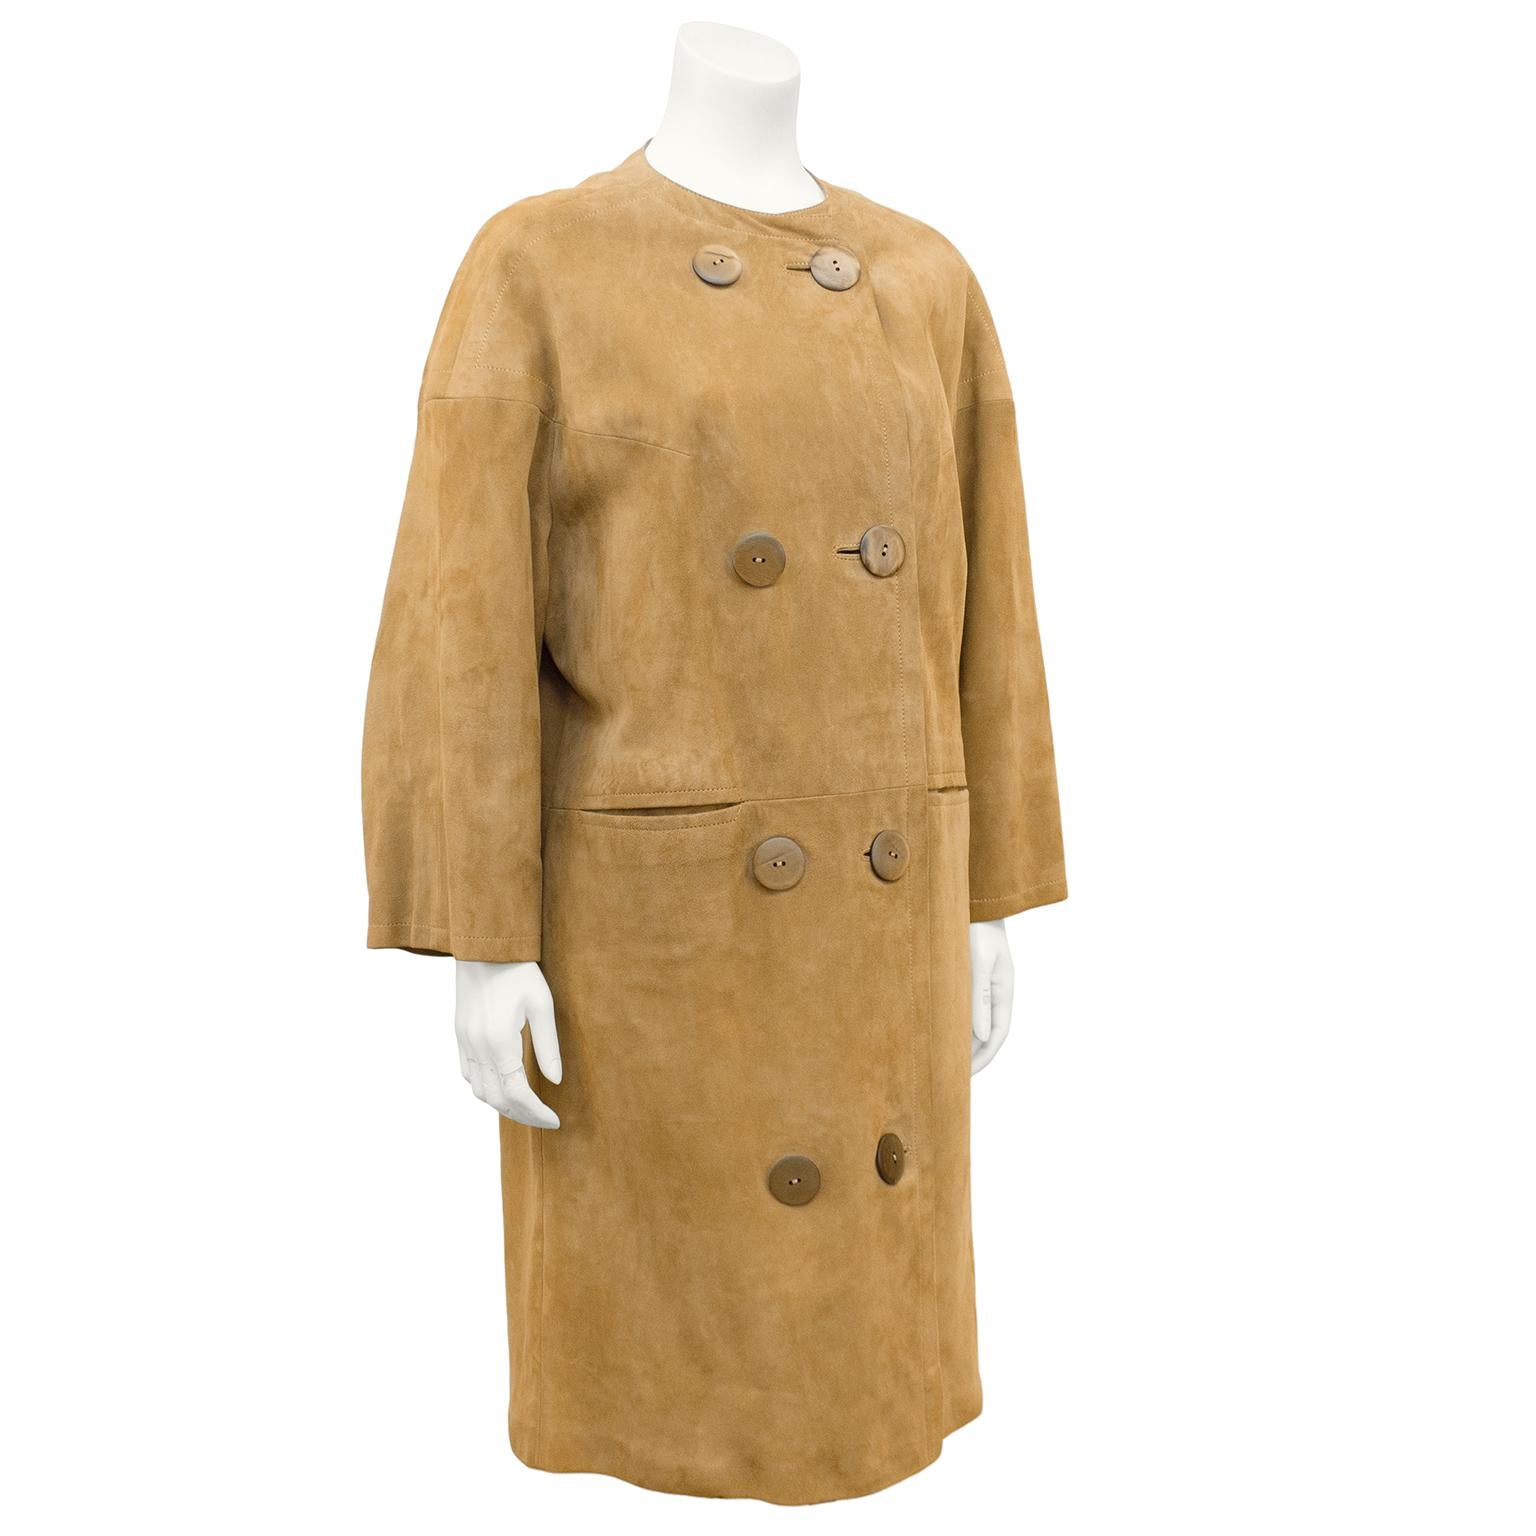 1960's Swedish made mod beige double breasted kid suede coat. Collarless with drop shoulders, large semi clear plastic buttons and horizontal slit pockets. Monochromatic top stitching and satin lining. Marked size 38. Excellent vintage condition.